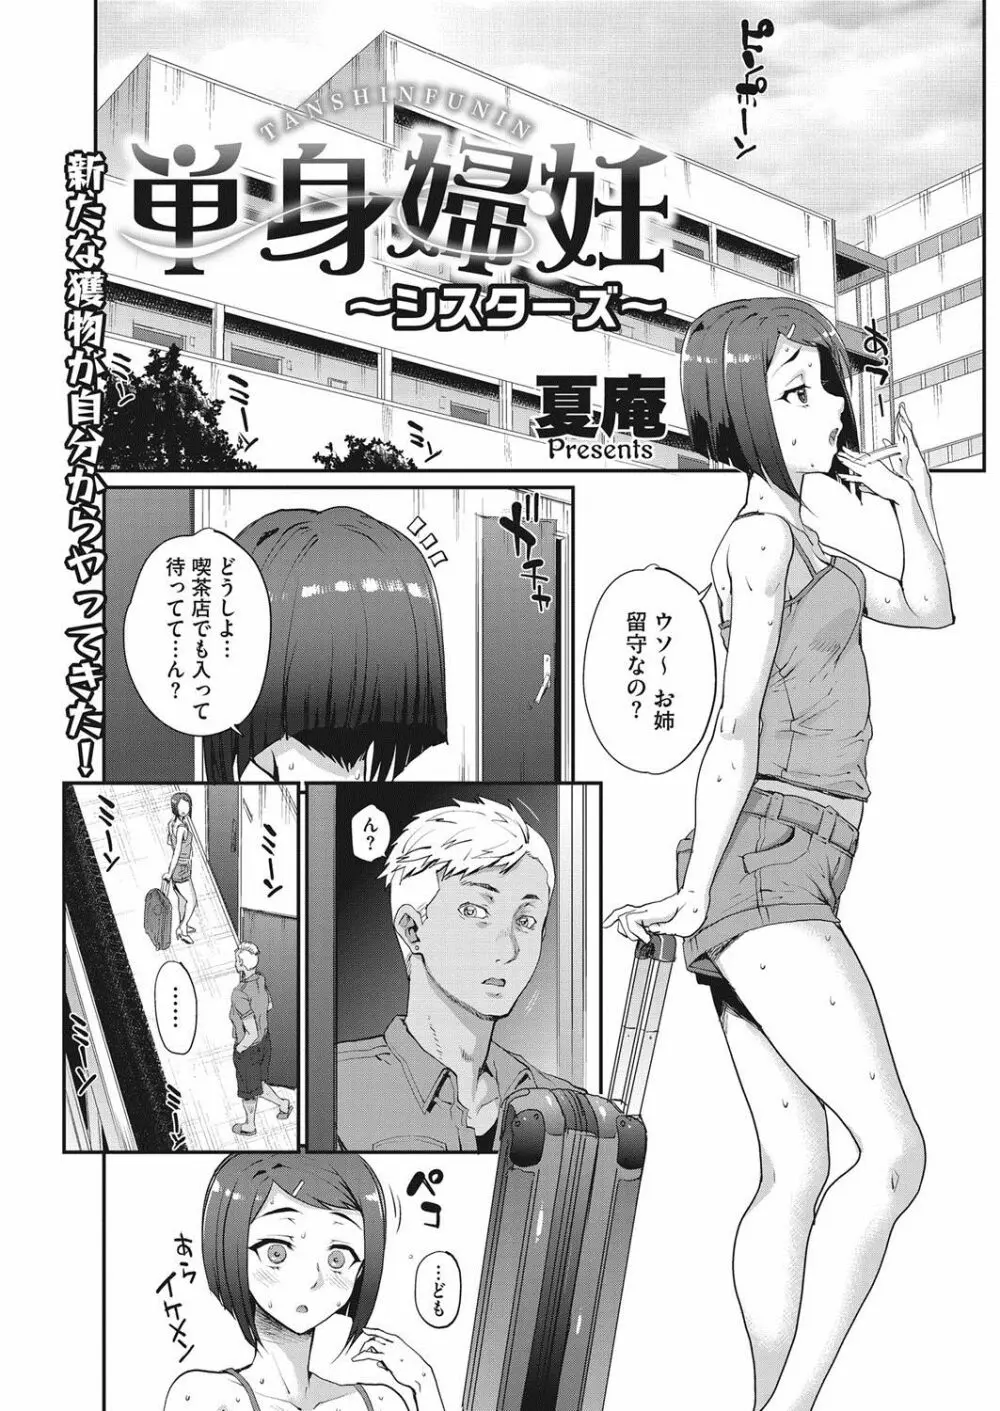 [Carn] Tanshinfunin ~Sisters~ Ch 1-7 47ページ